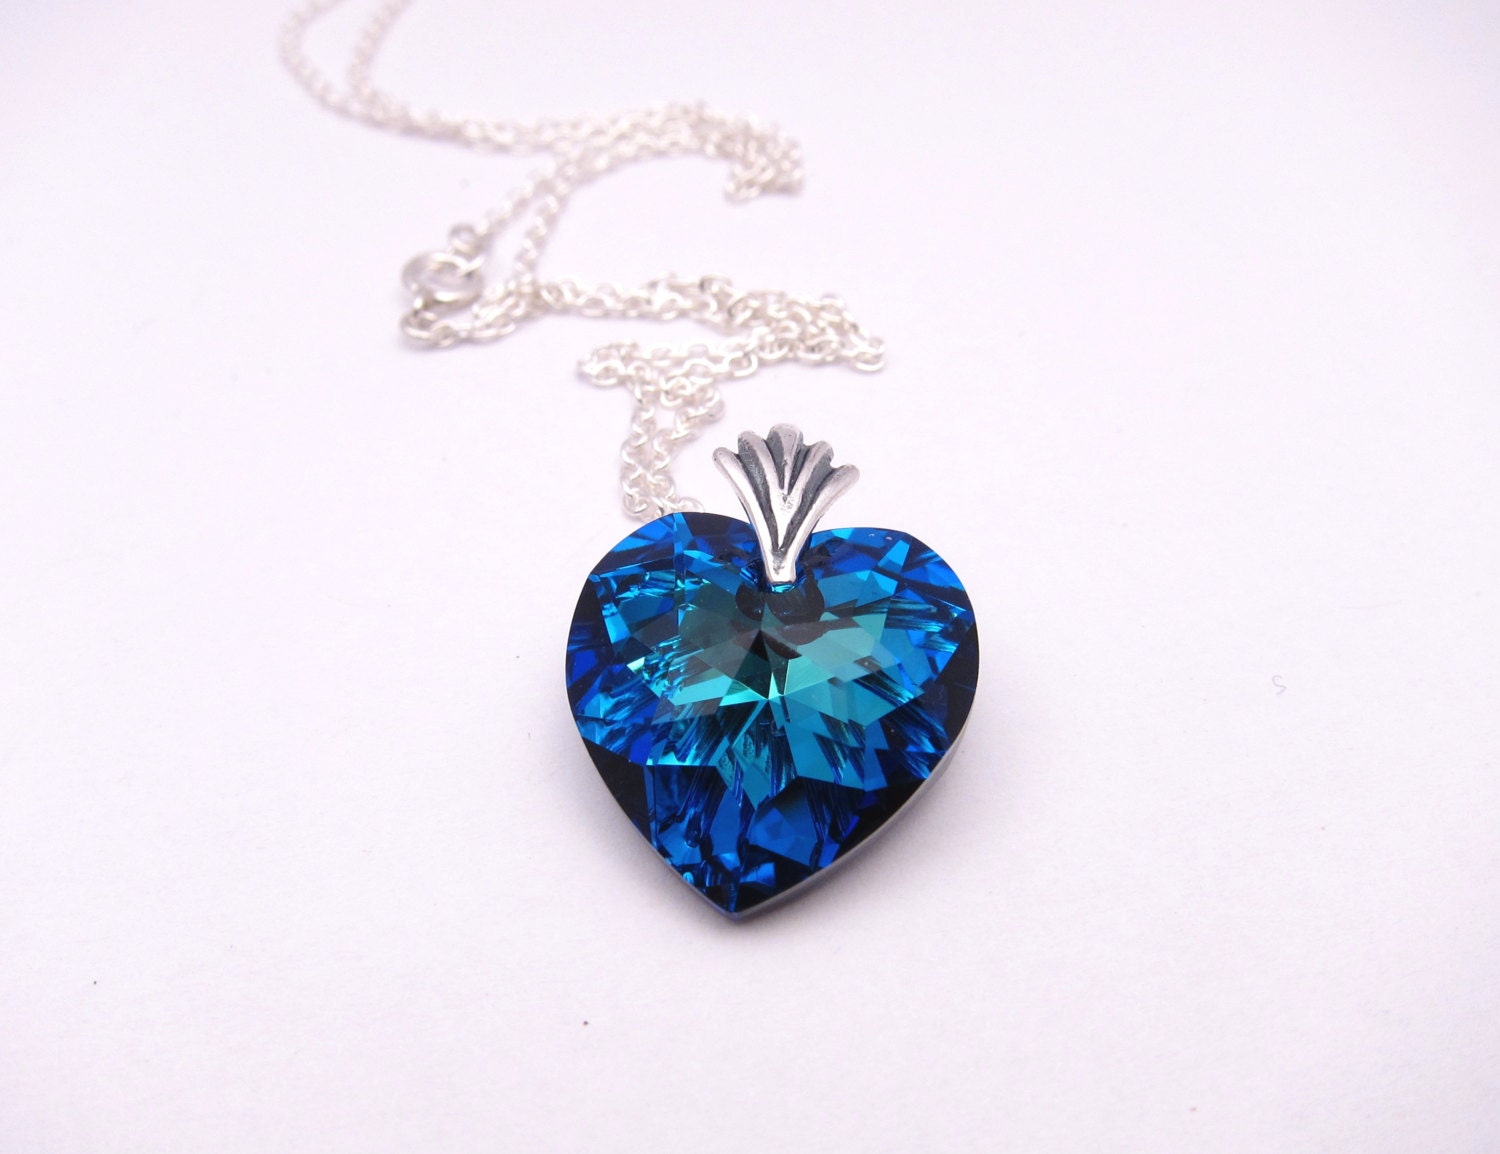 Heart Pendant Necklace Project Using Swarovski Crystals